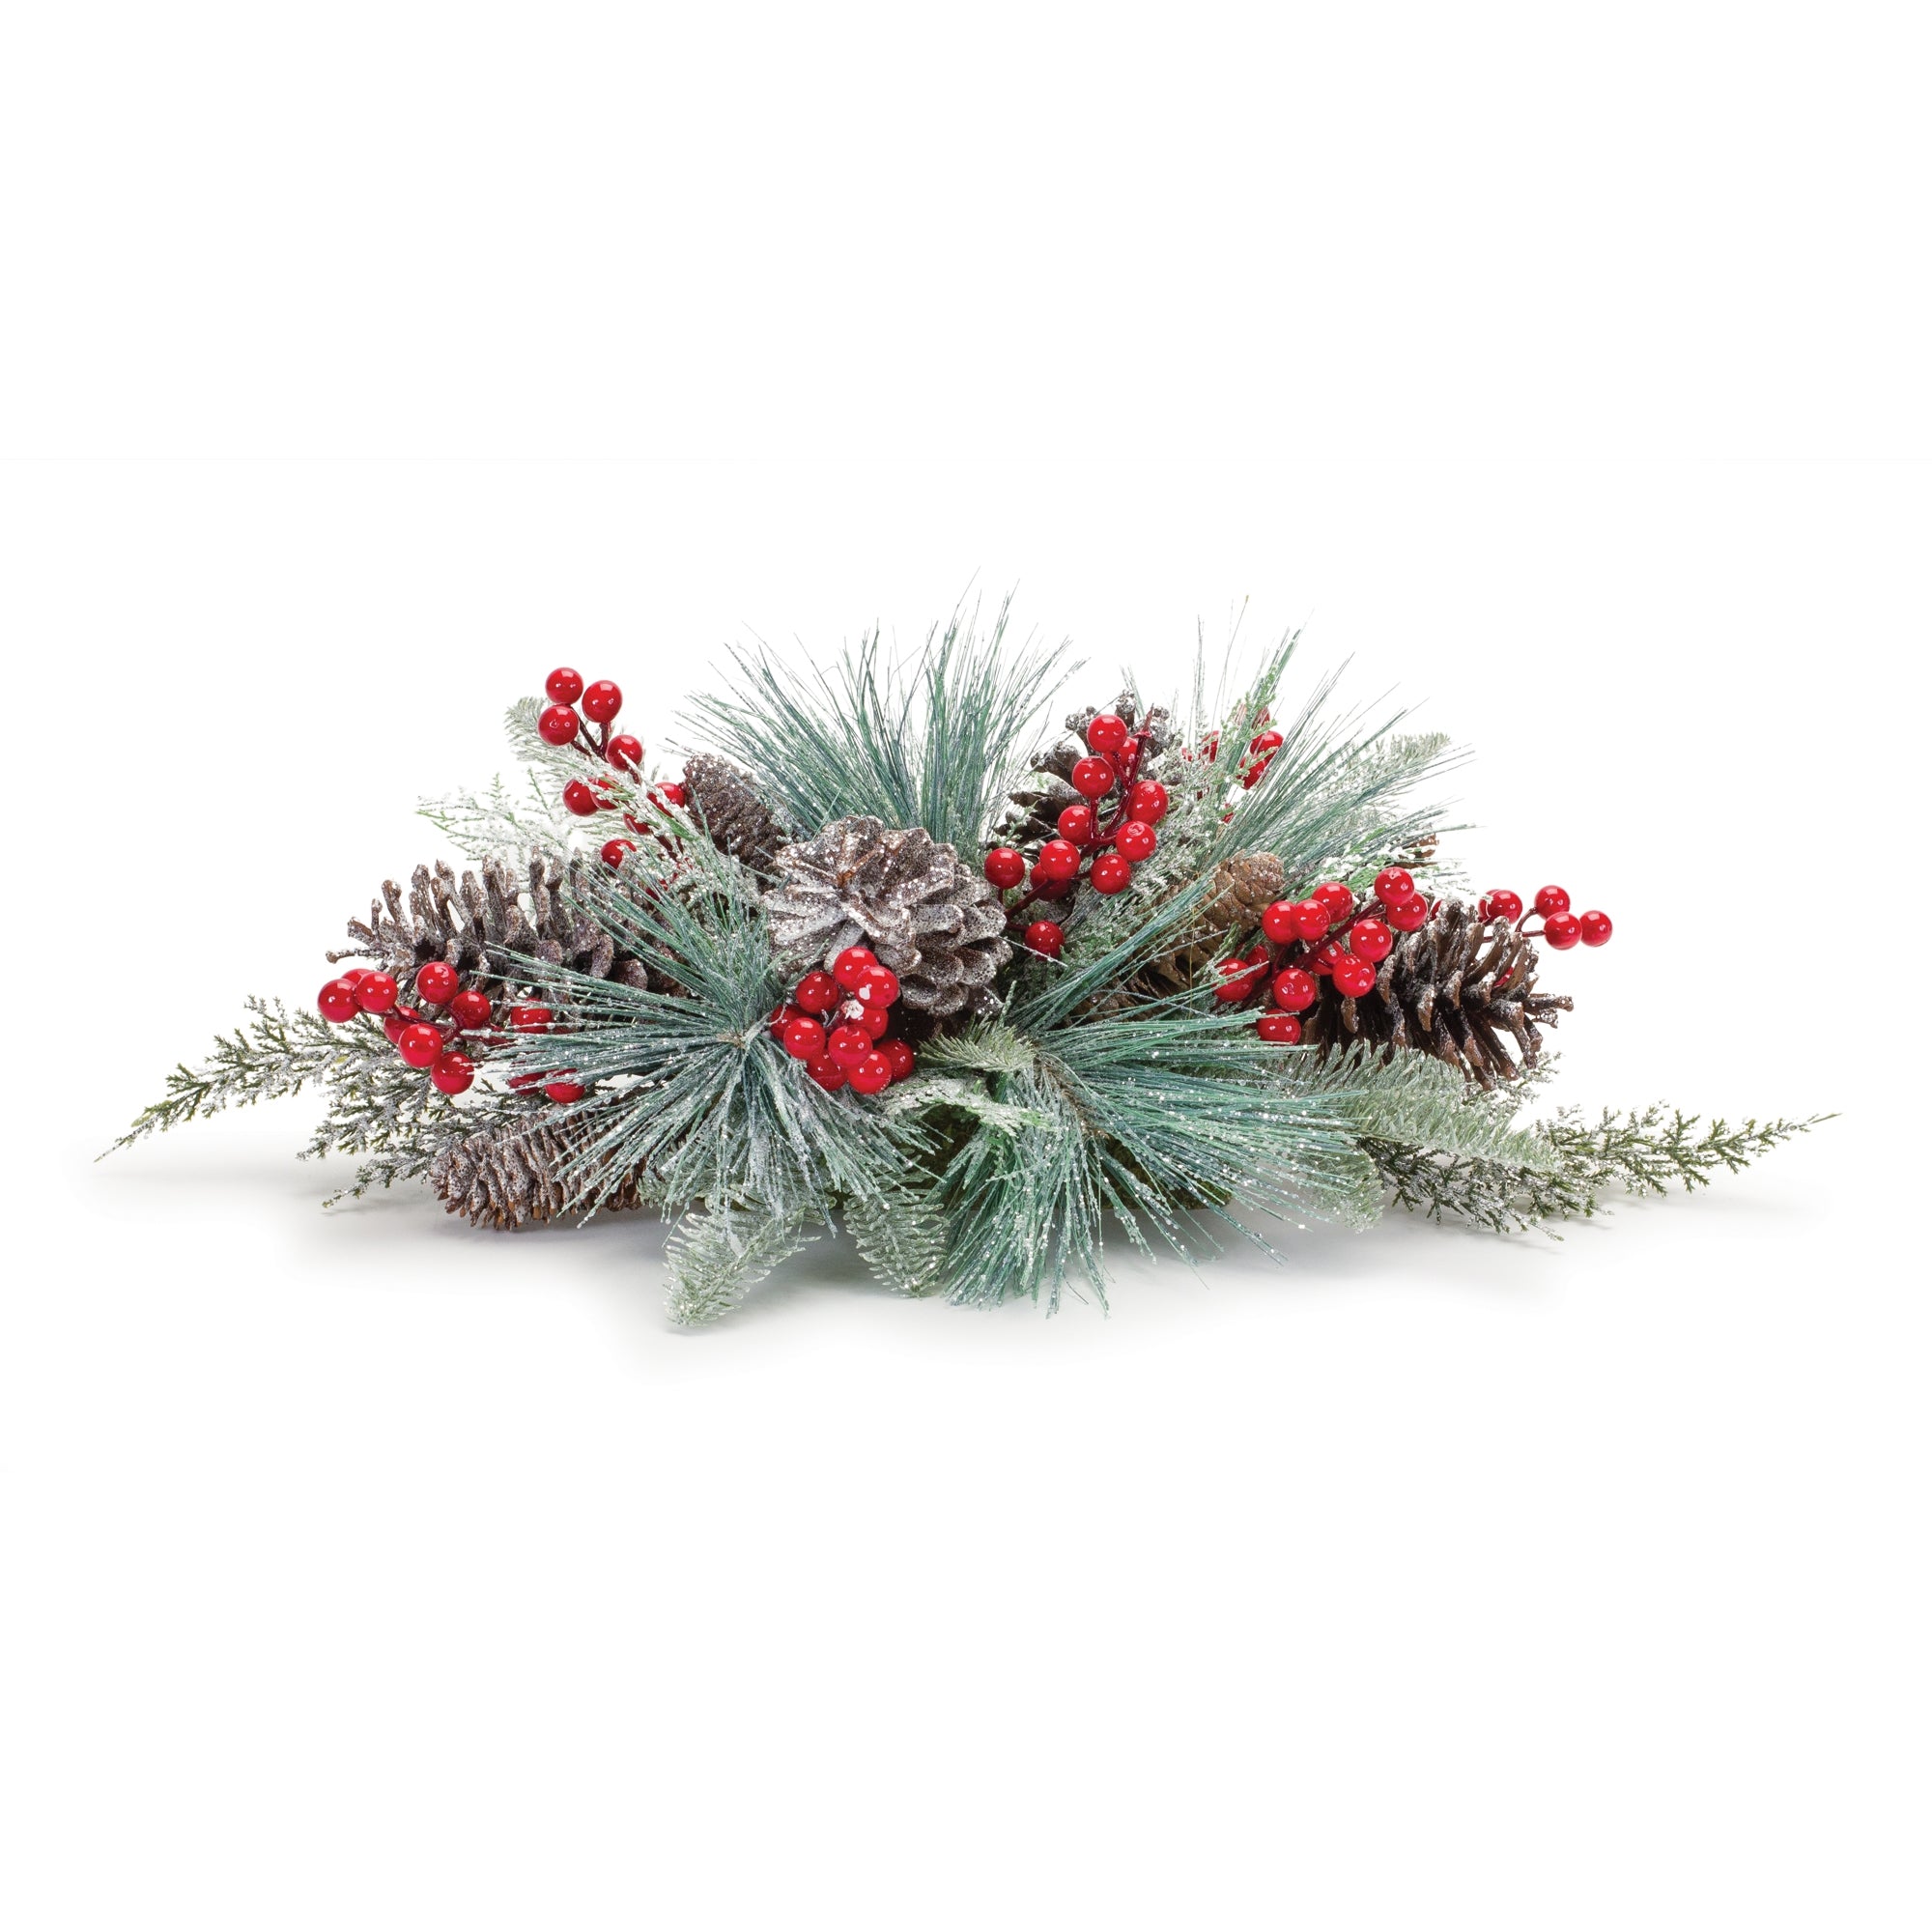 Frosted Pine Cone and Berry Centerpiece 25.25"L